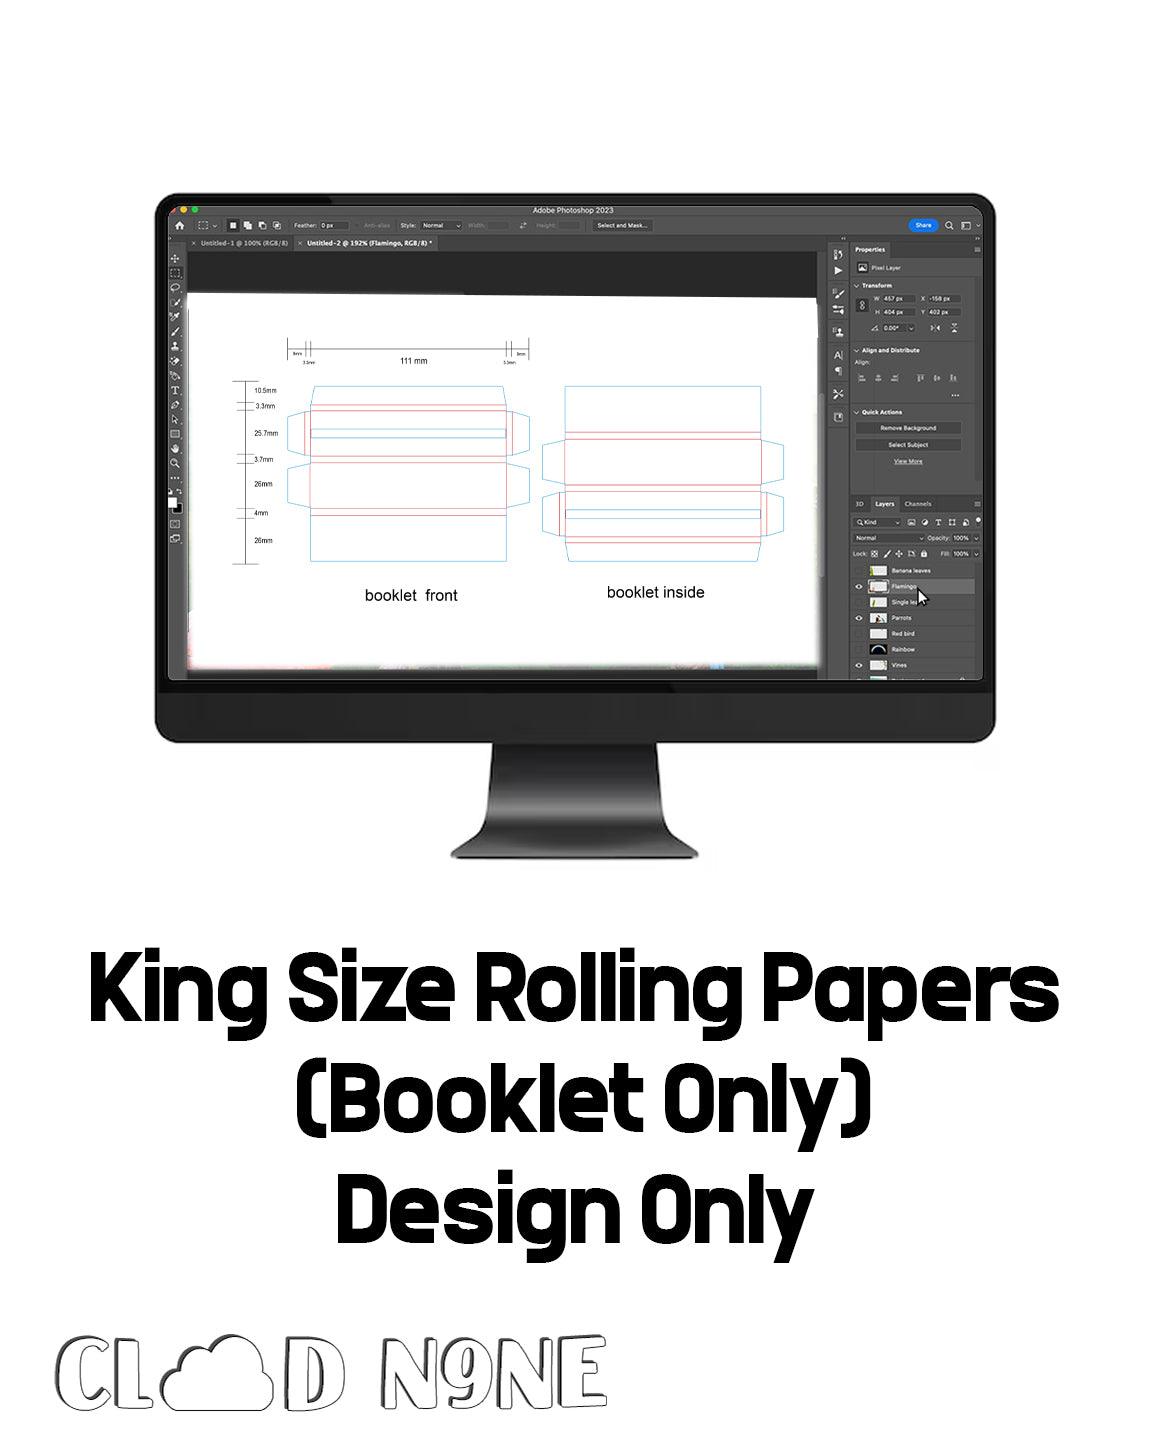 King Size Rolling Papers Design (Choose Your Budget) - CloudNine